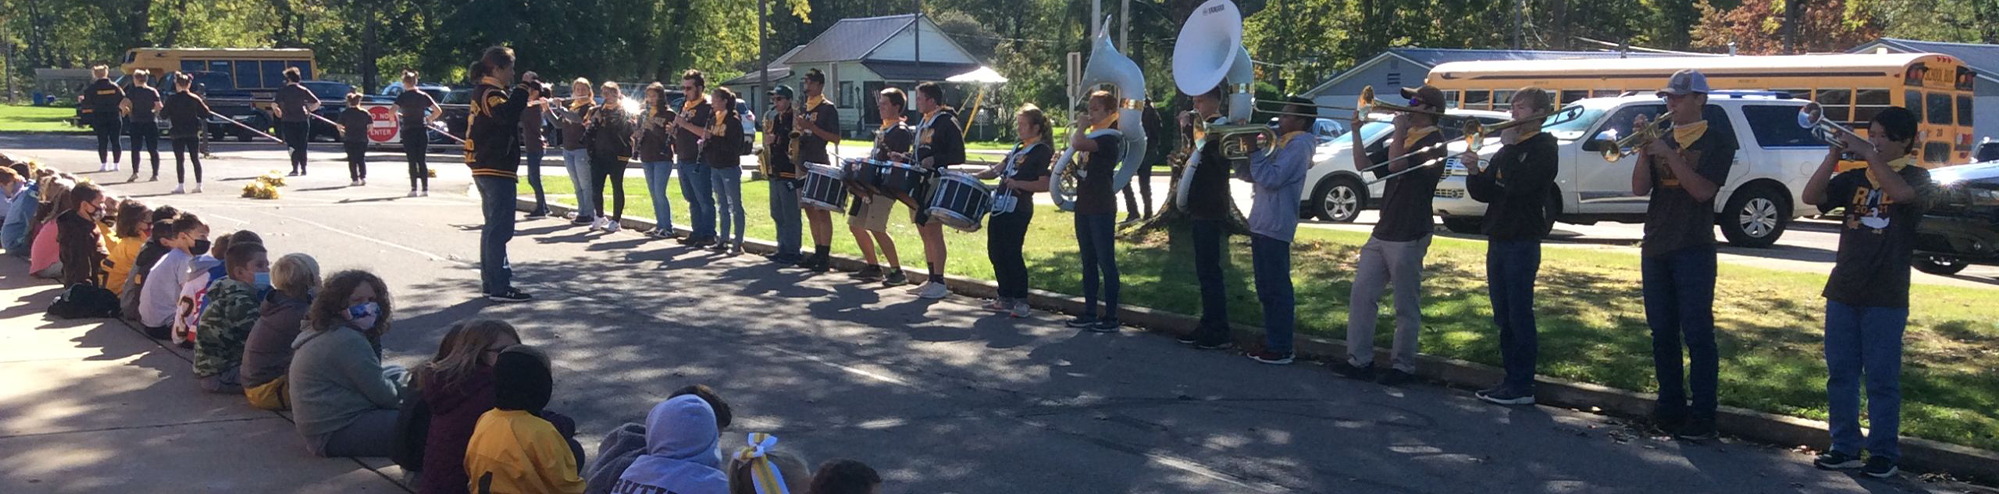 Band playing outside for students